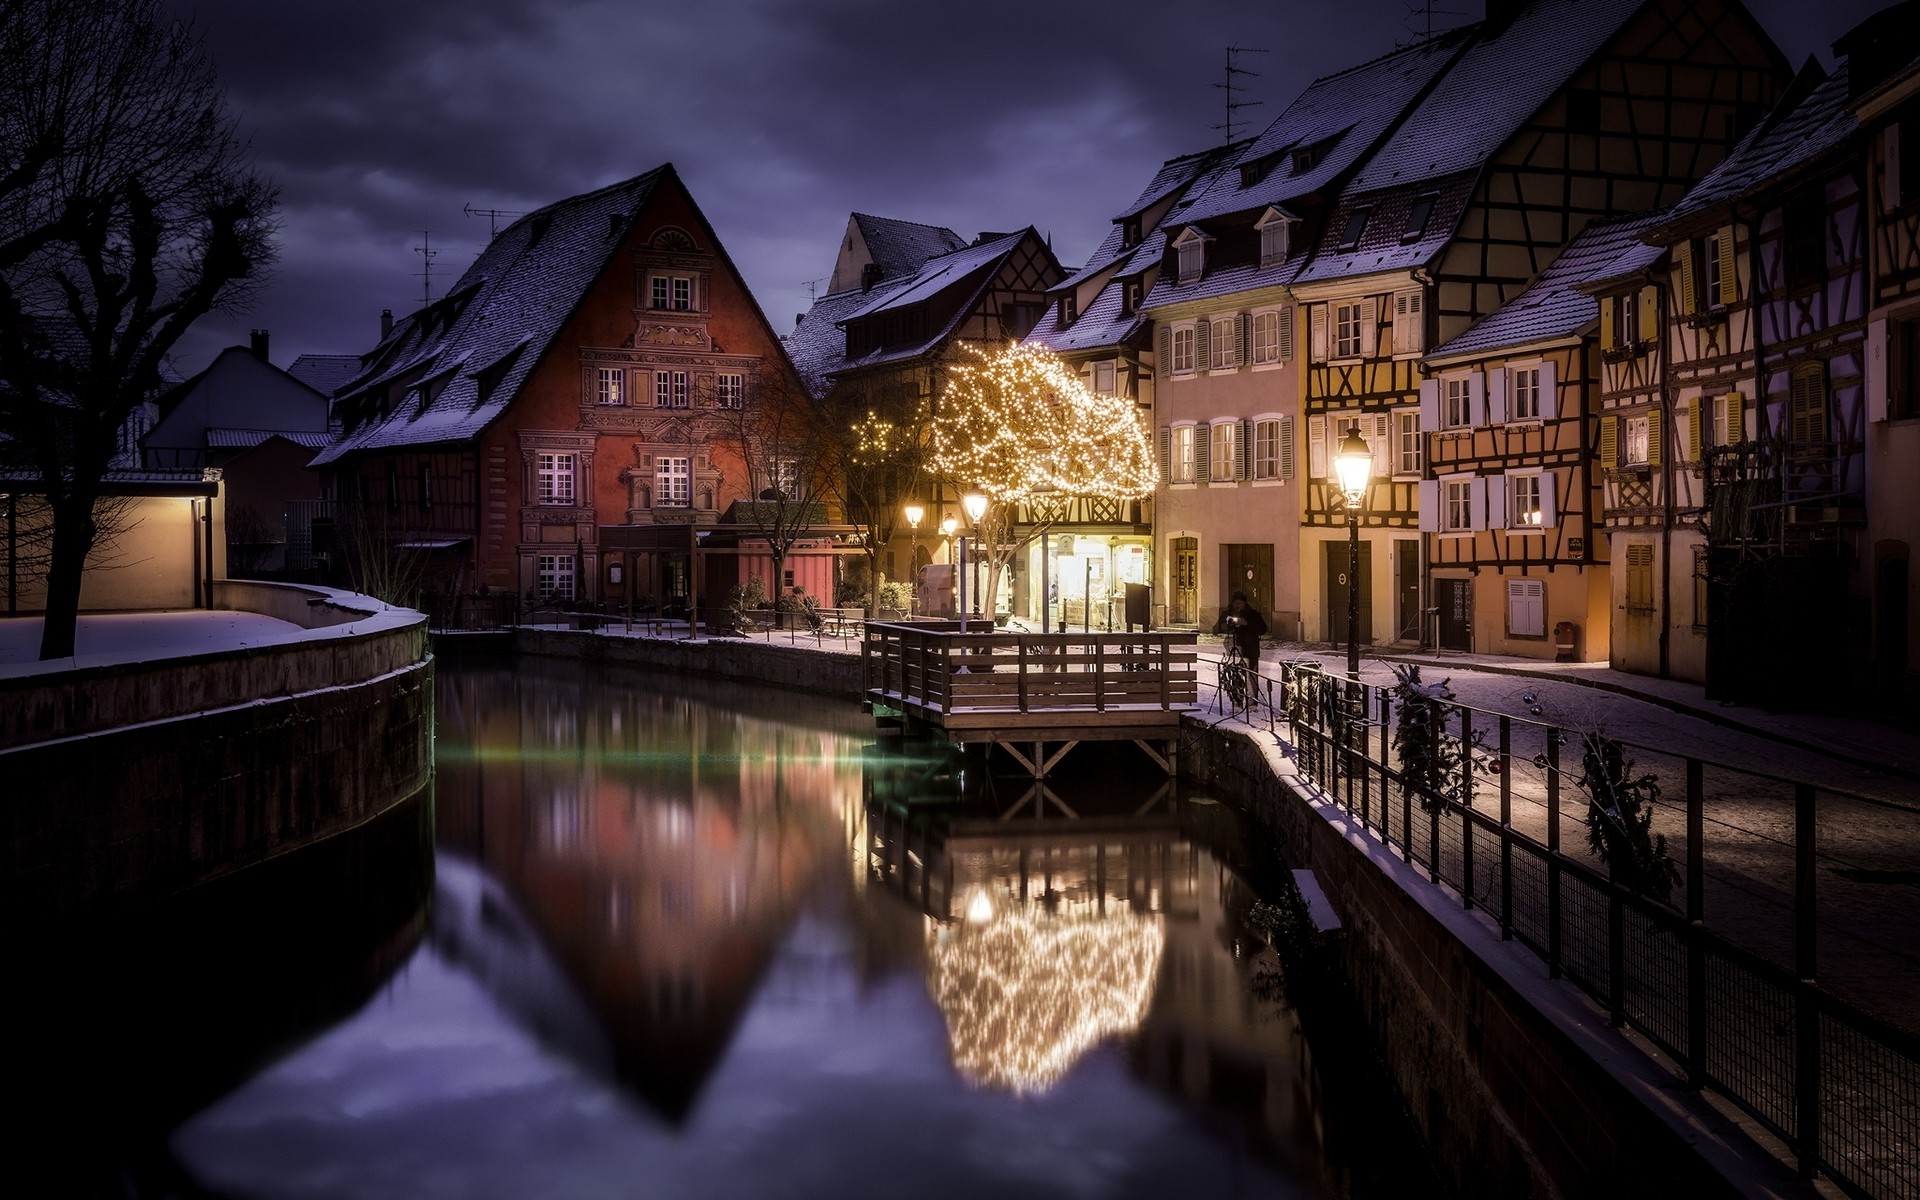 landscape, Nature, City, Canal, House, Winter, Snow, Christmas Ornaments, Lantern, France, Fence, Street, Water, Lights Wallpaper